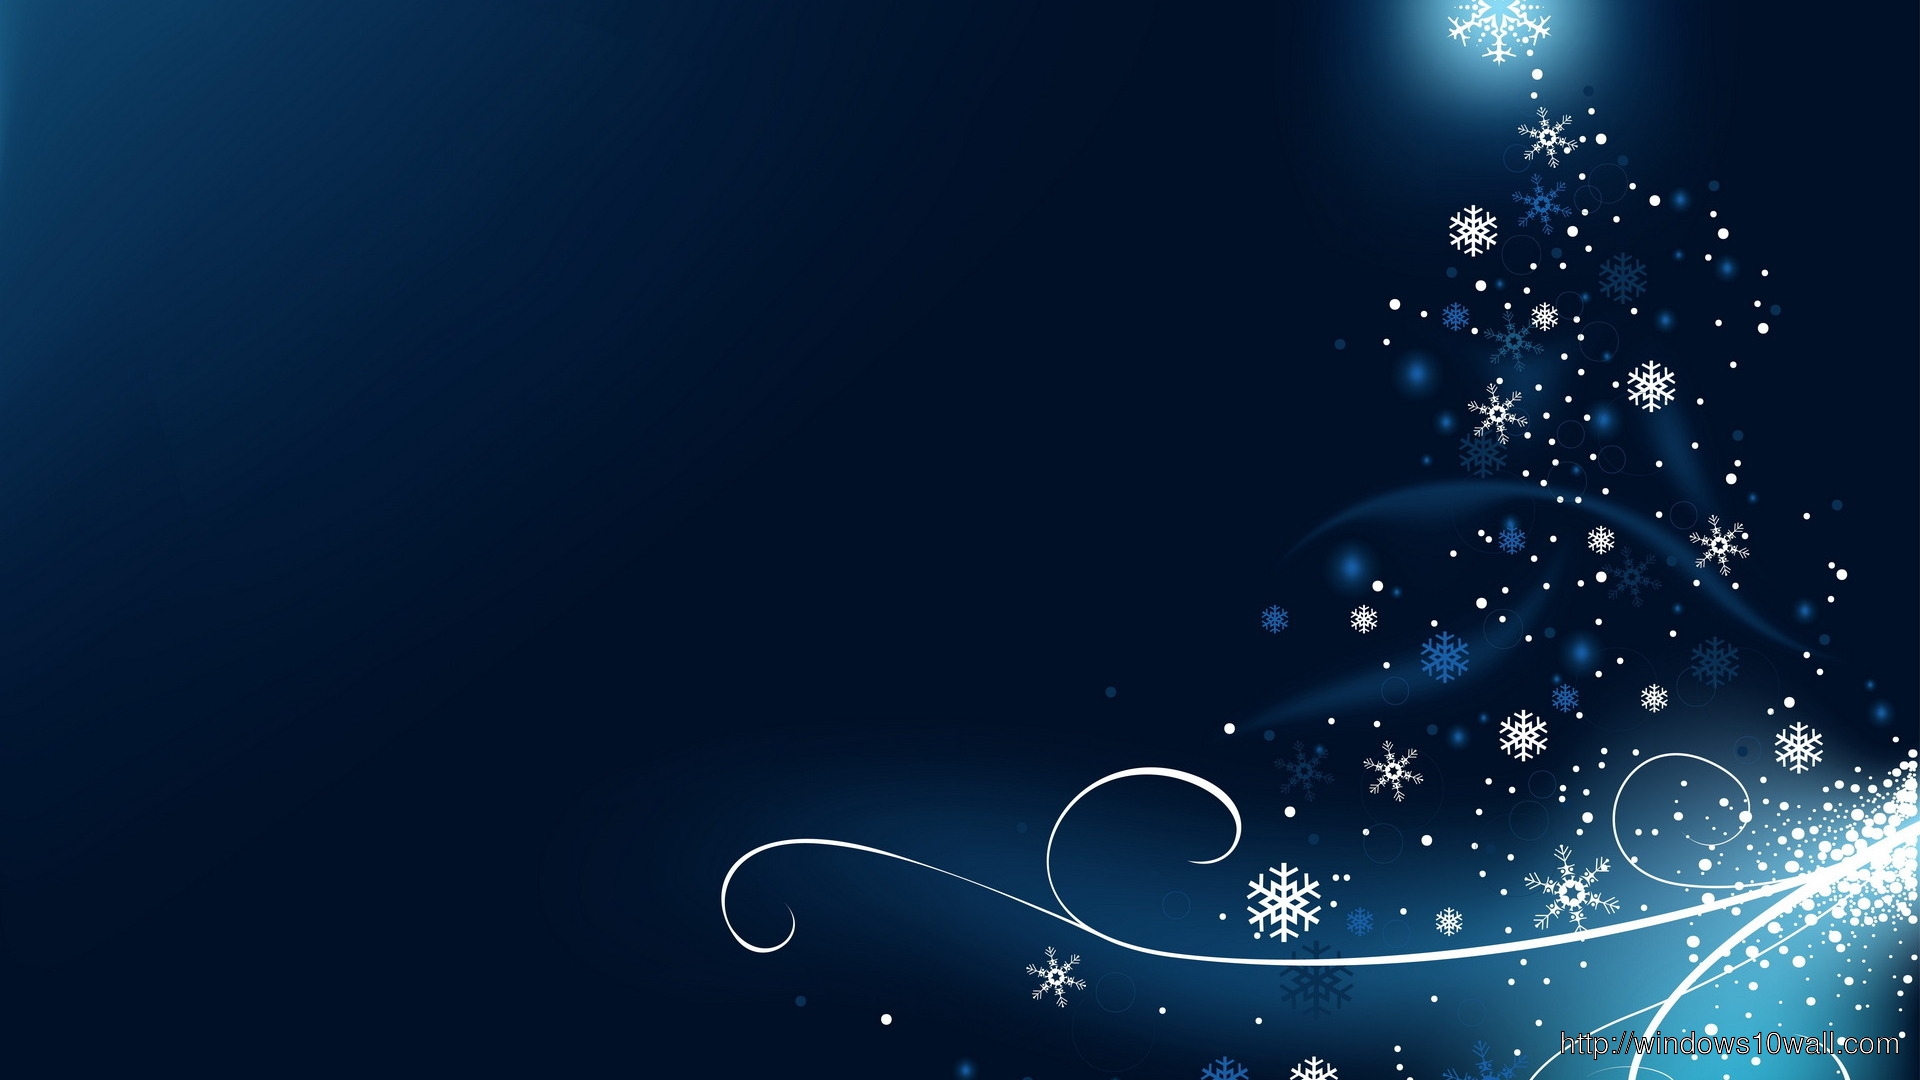 Awesome Snowflakes Abstract Wallpaper